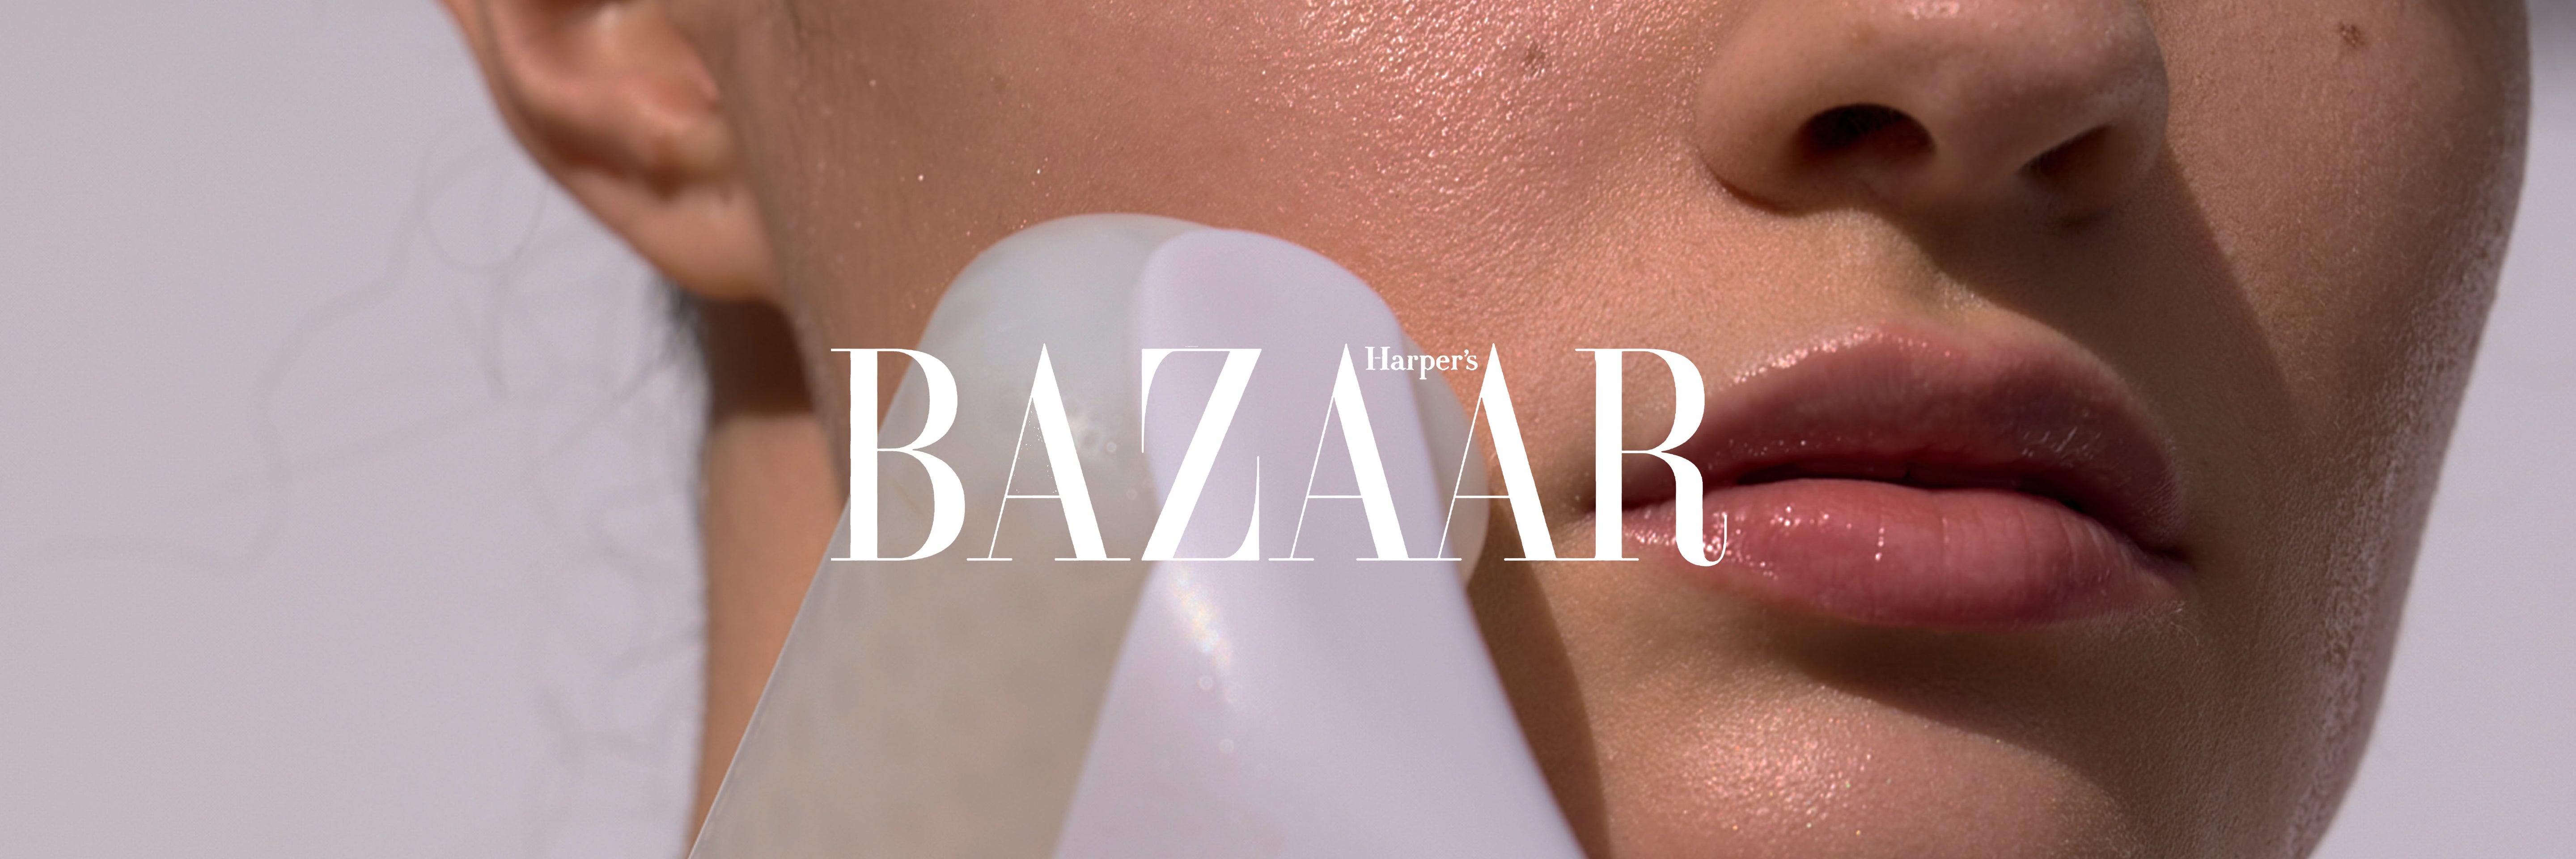 SEE WHAT HARPER’S BAZAAR CALLS A COVETED TOOL